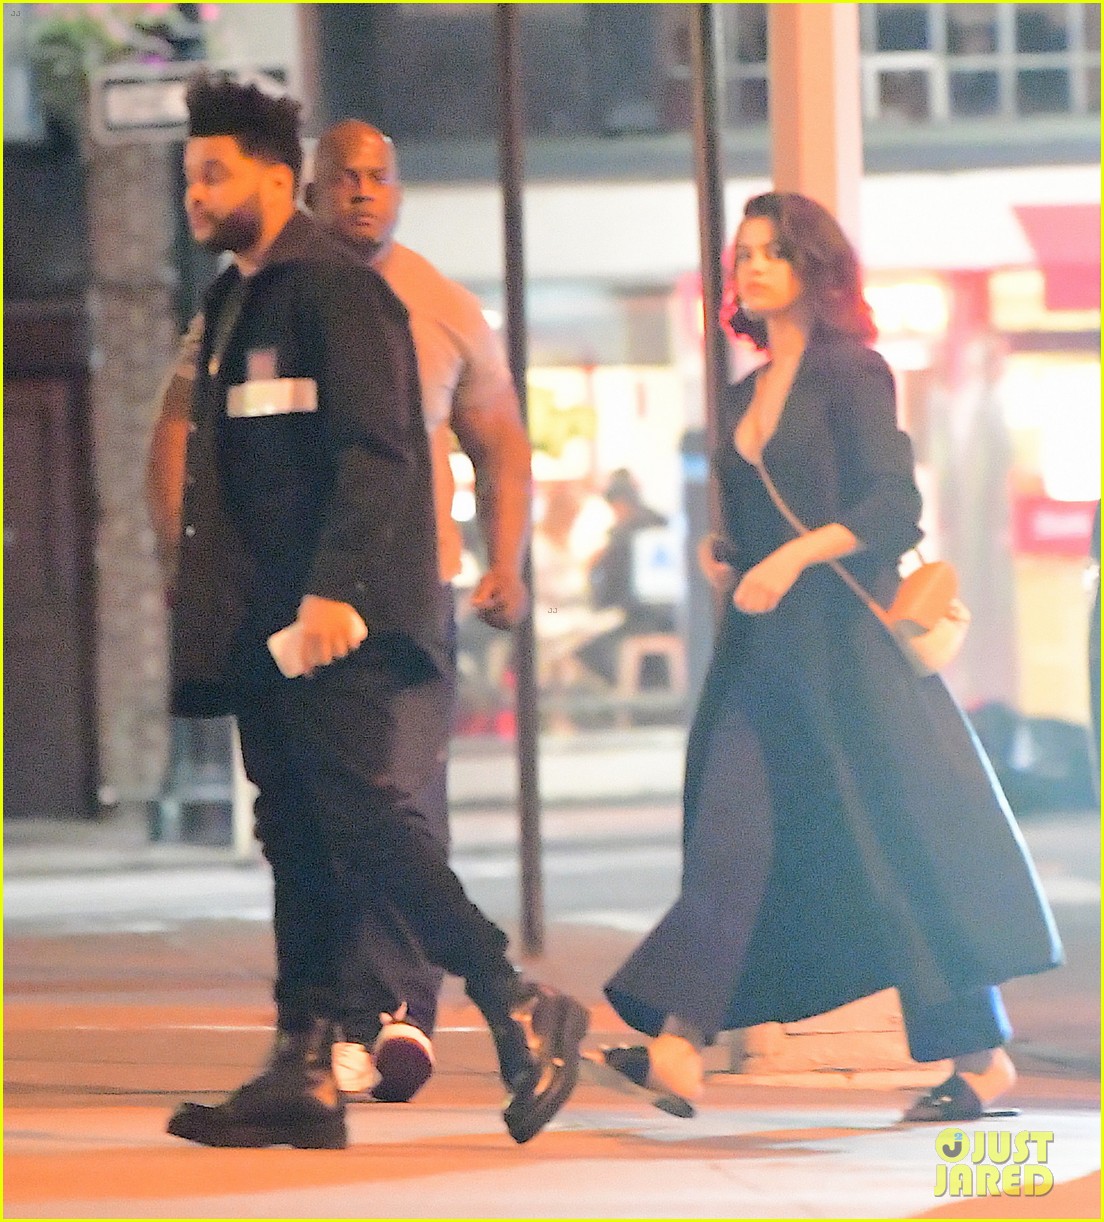 selena gomez the weeknd spend time together in new york city 03